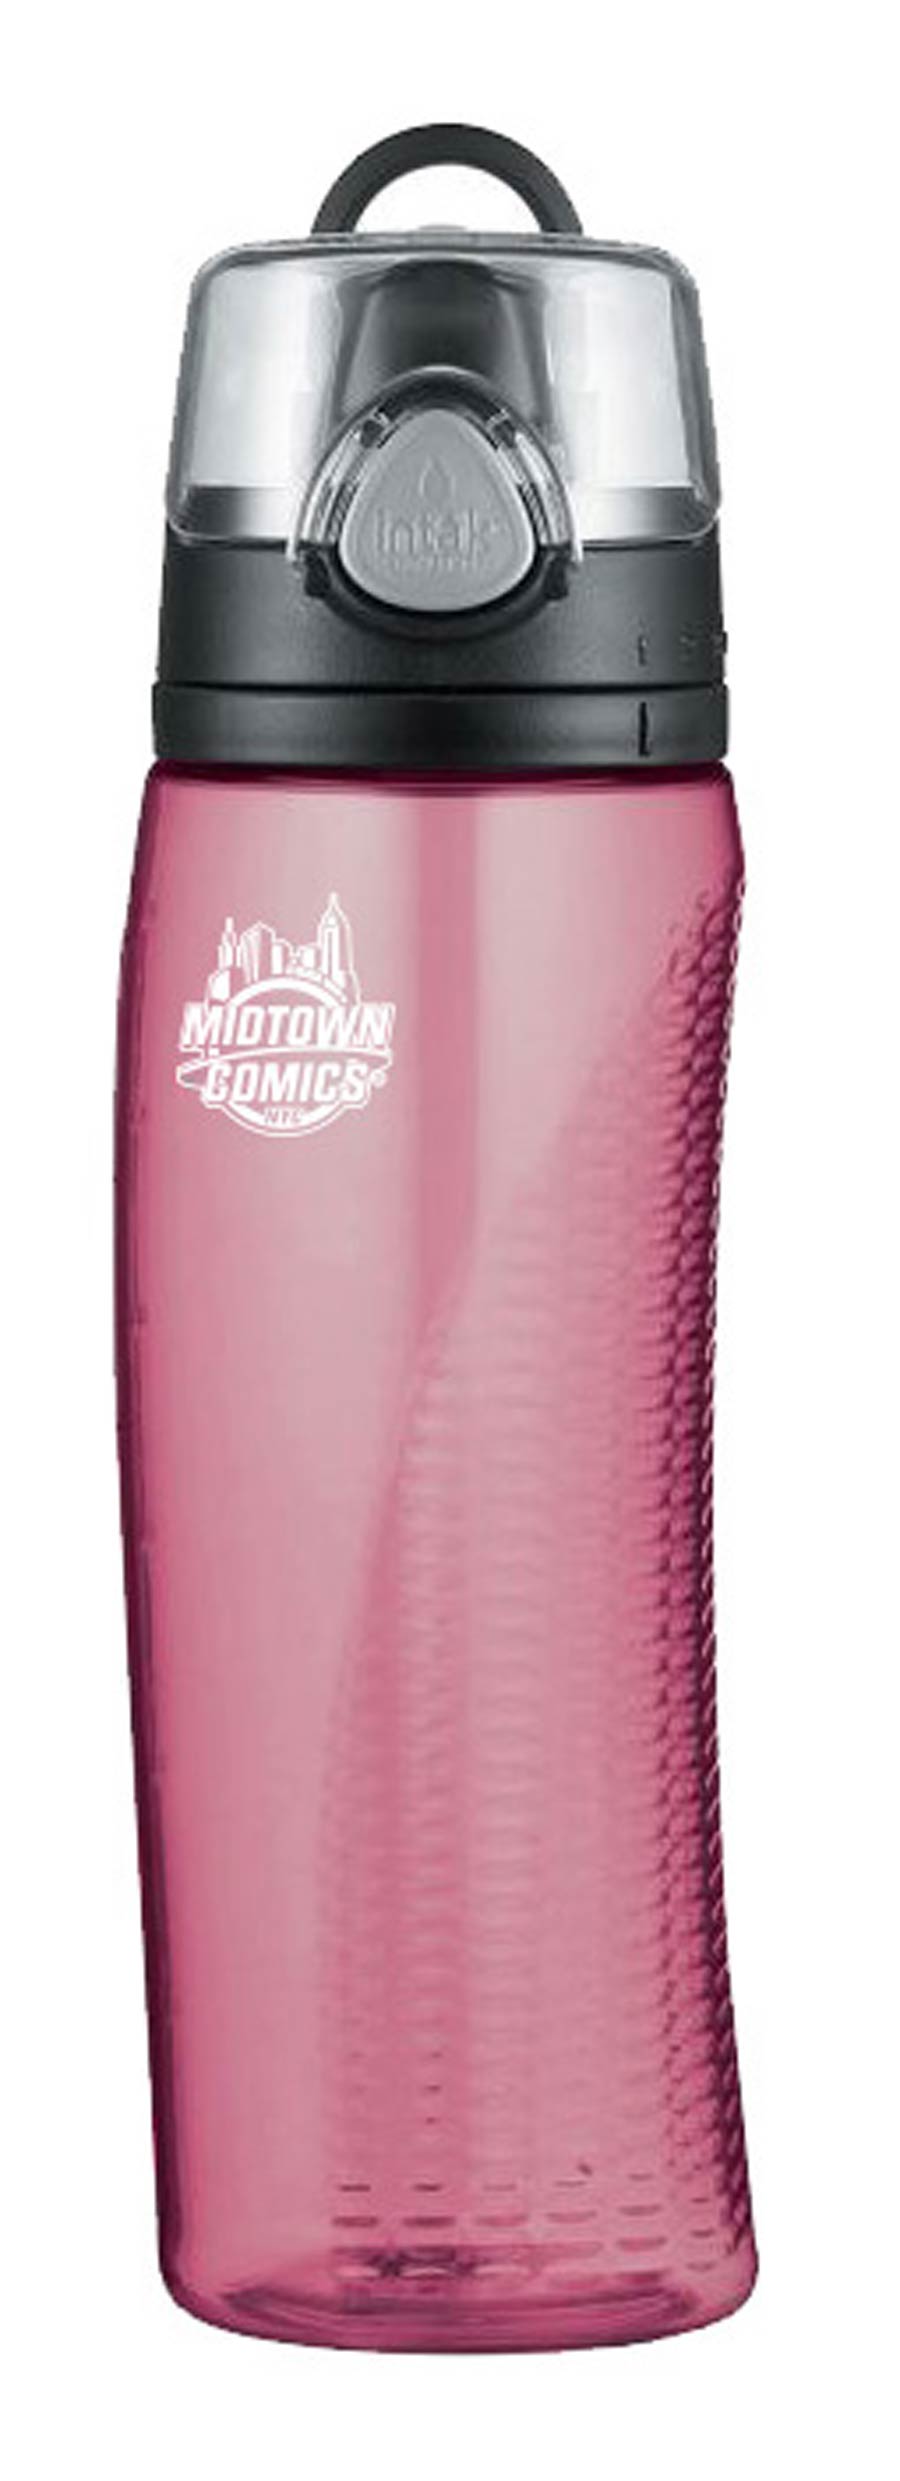 Midtown Comics White Logo Thermos Hydration With Meter 24-ounce Pink Sports Bottle